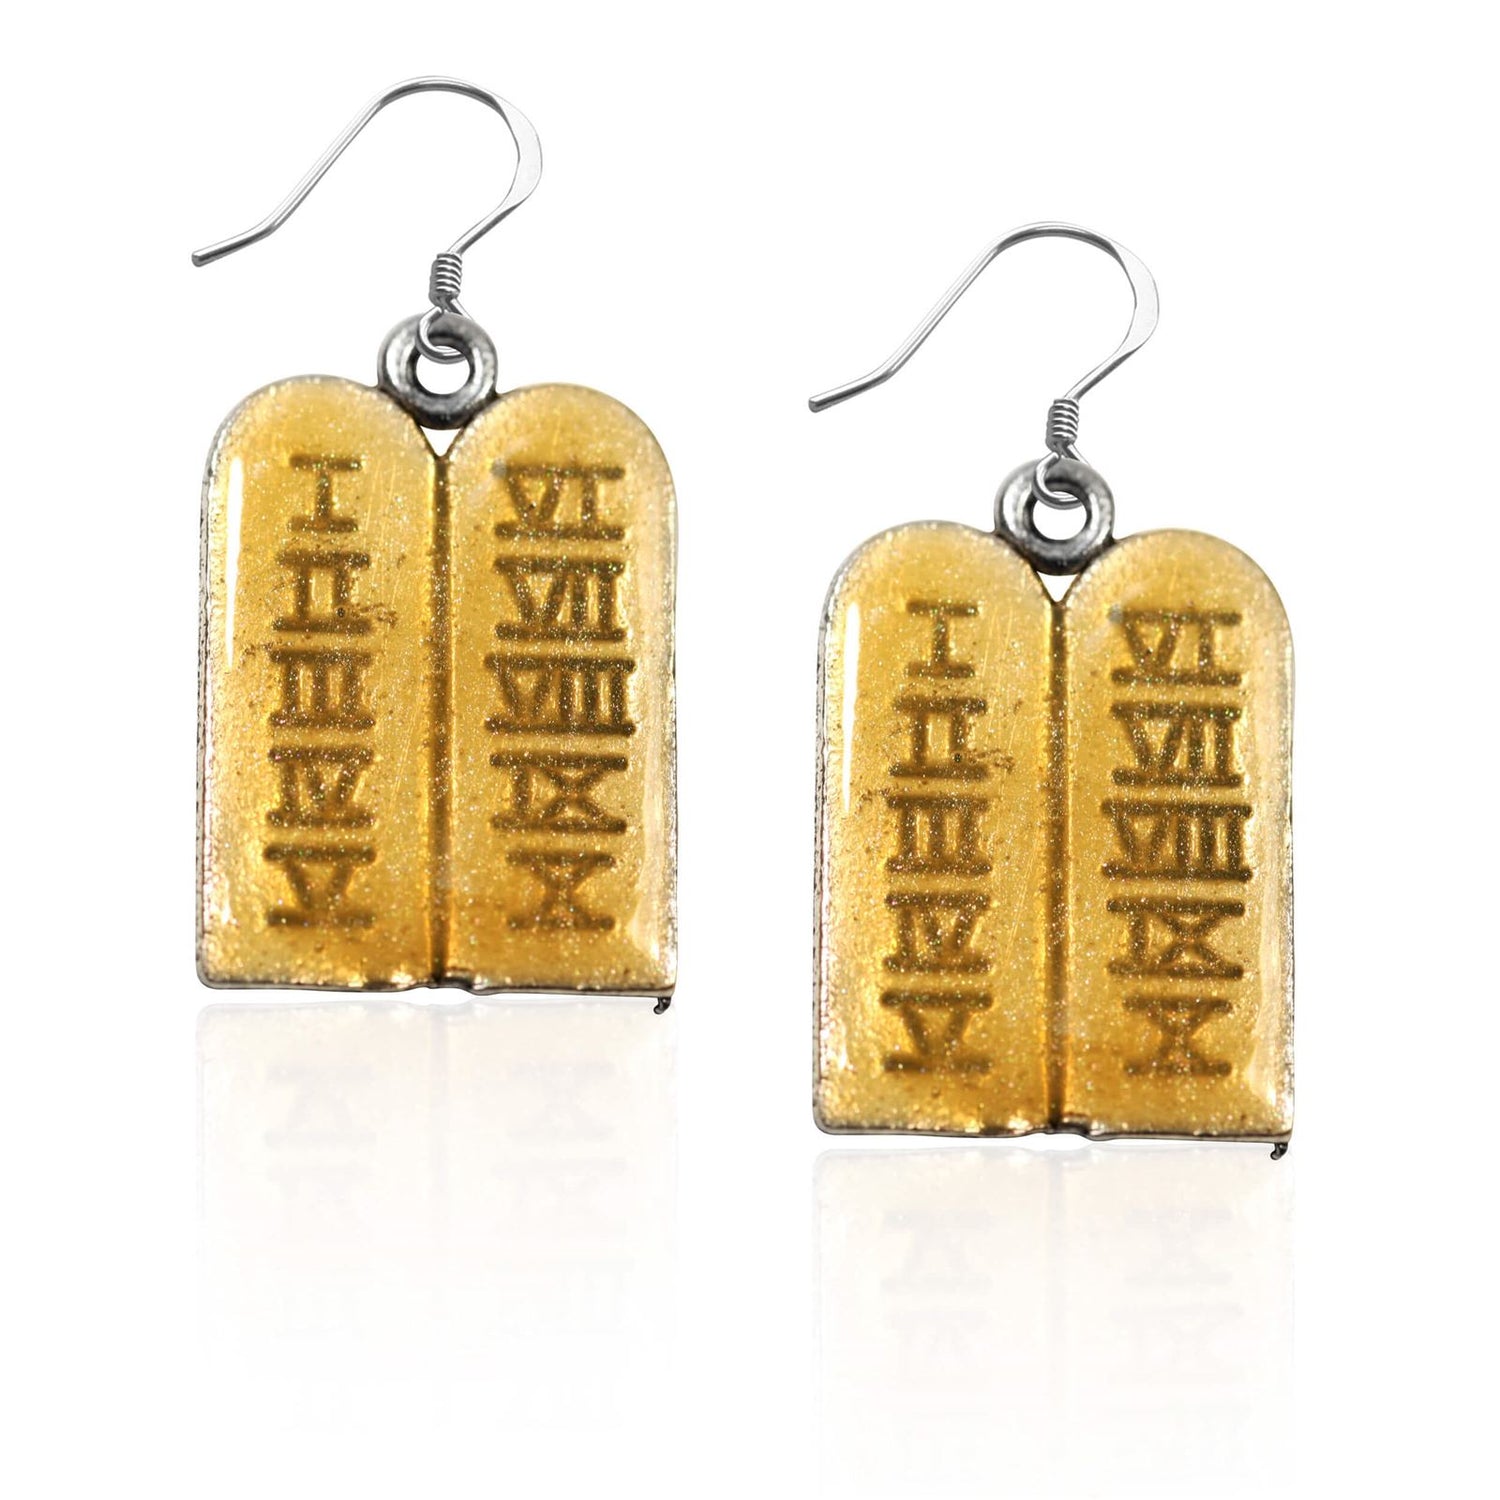 Whimsical Gifts | Religious Ten Commandments Charm Earrings in Silver Finish | Religious & Spiritual |  | Jewelry